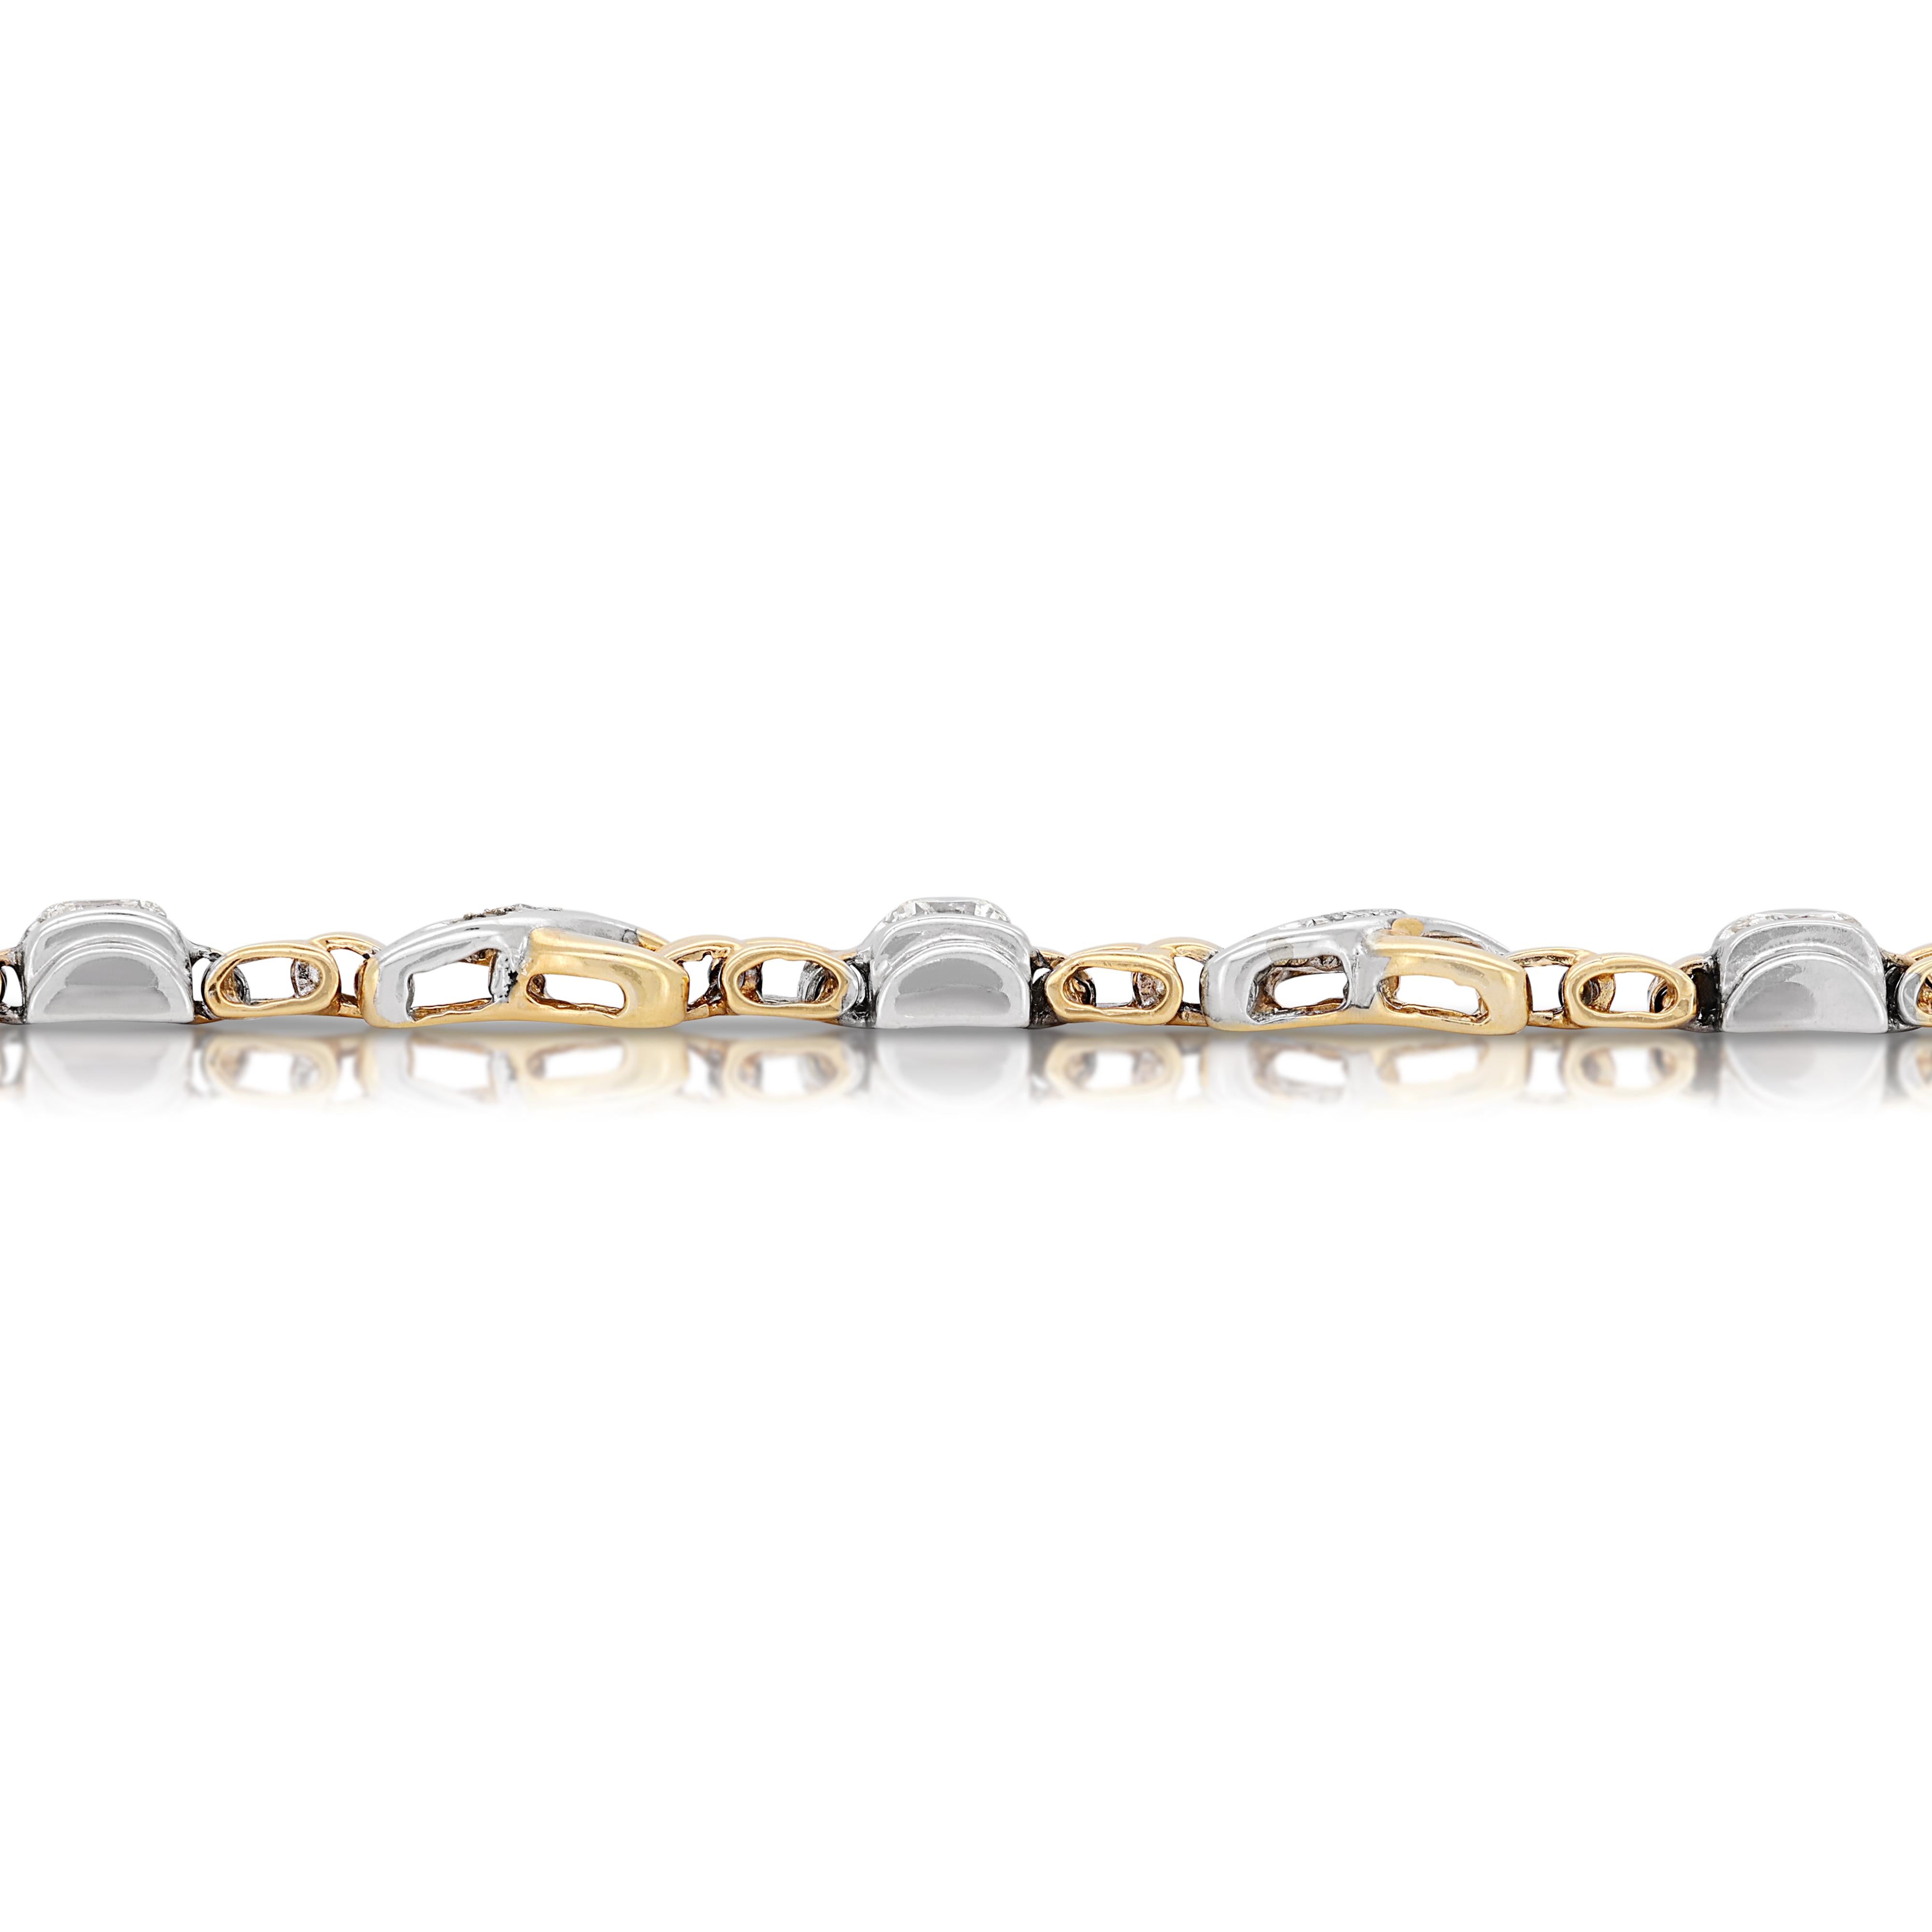 Round Cut Exquisite 1.44ct Diamonds Bracelet in 18K White and Yellow Gold For Sale